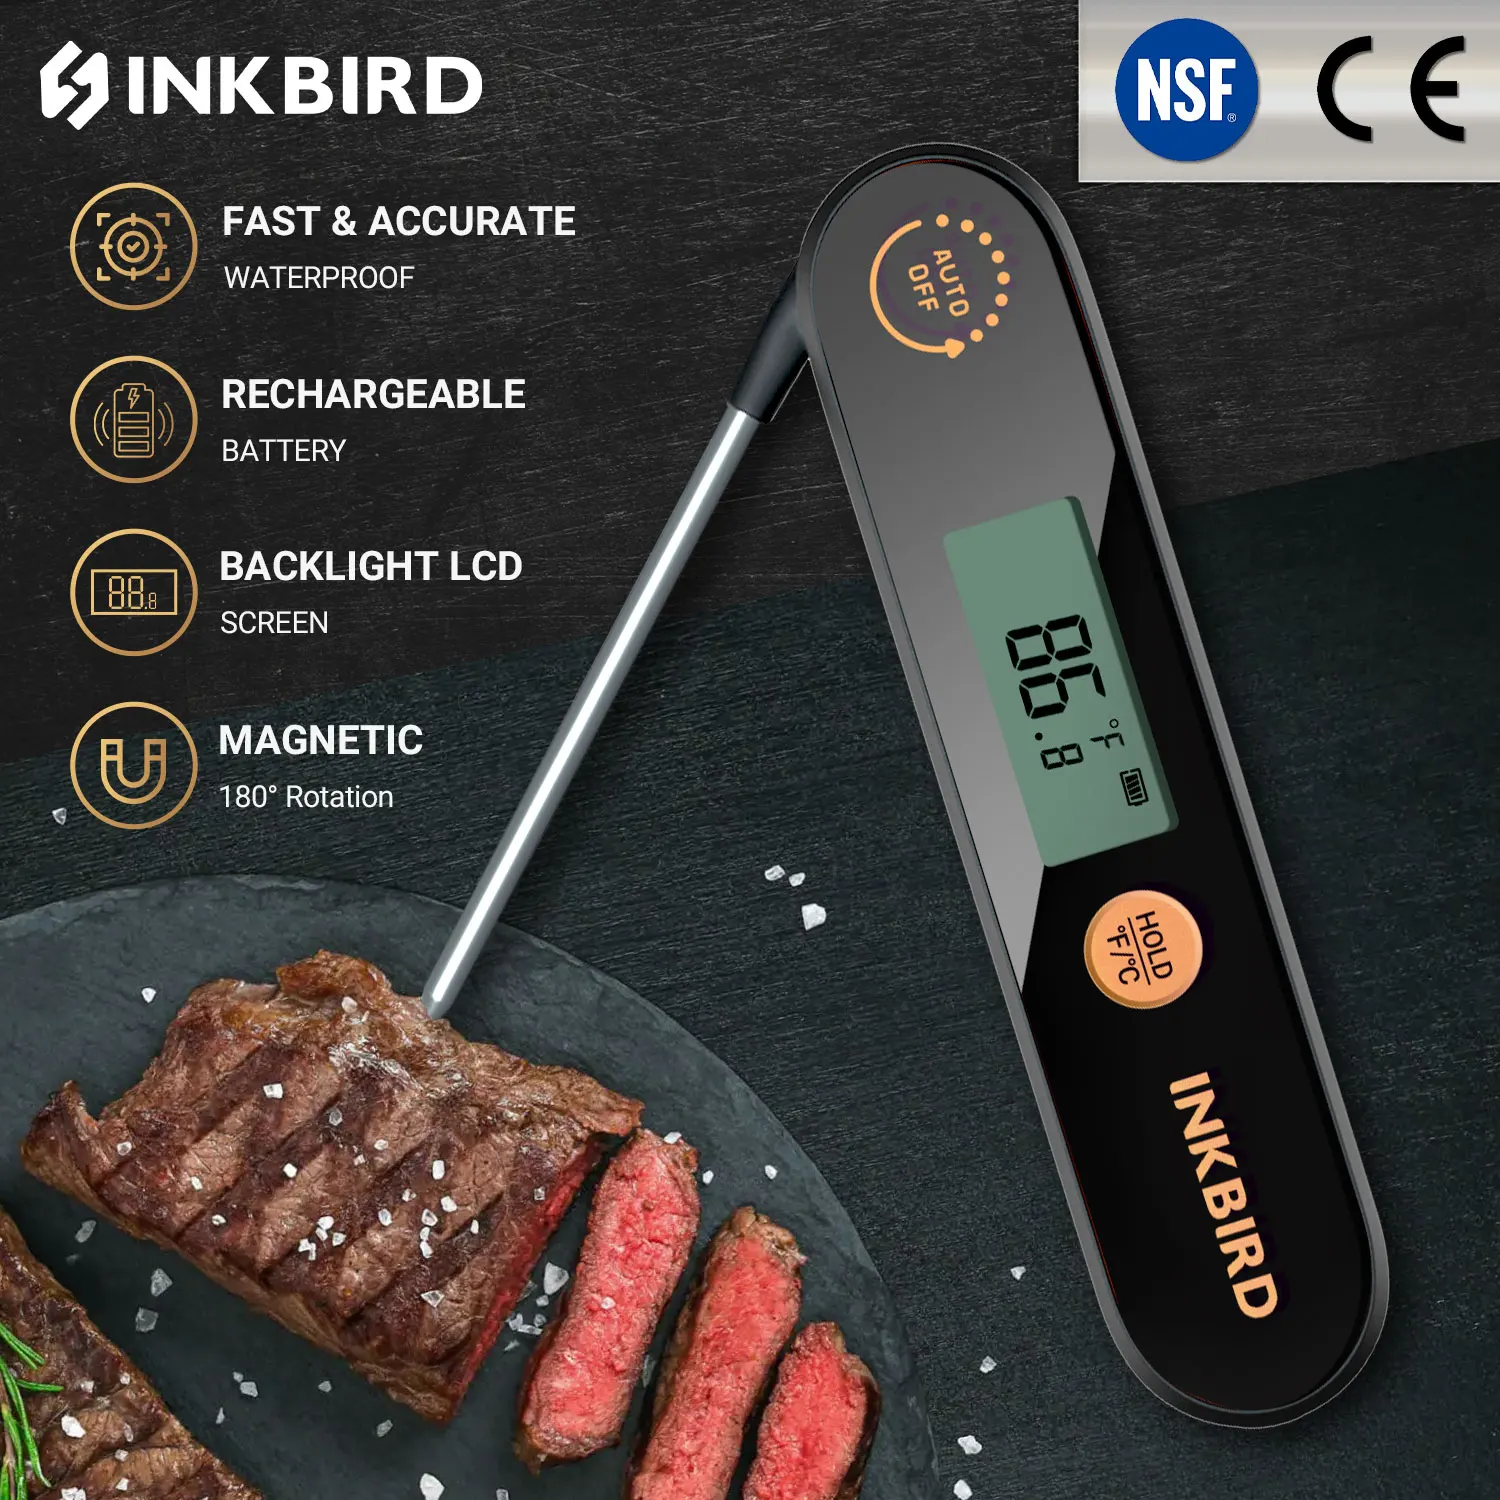 

INKBIRD IHT-1X Waterproof Digital Backlight Folding Barbecue Kitchen Cooking Instant Readin Meat Thermometer Oven BBQ Tools